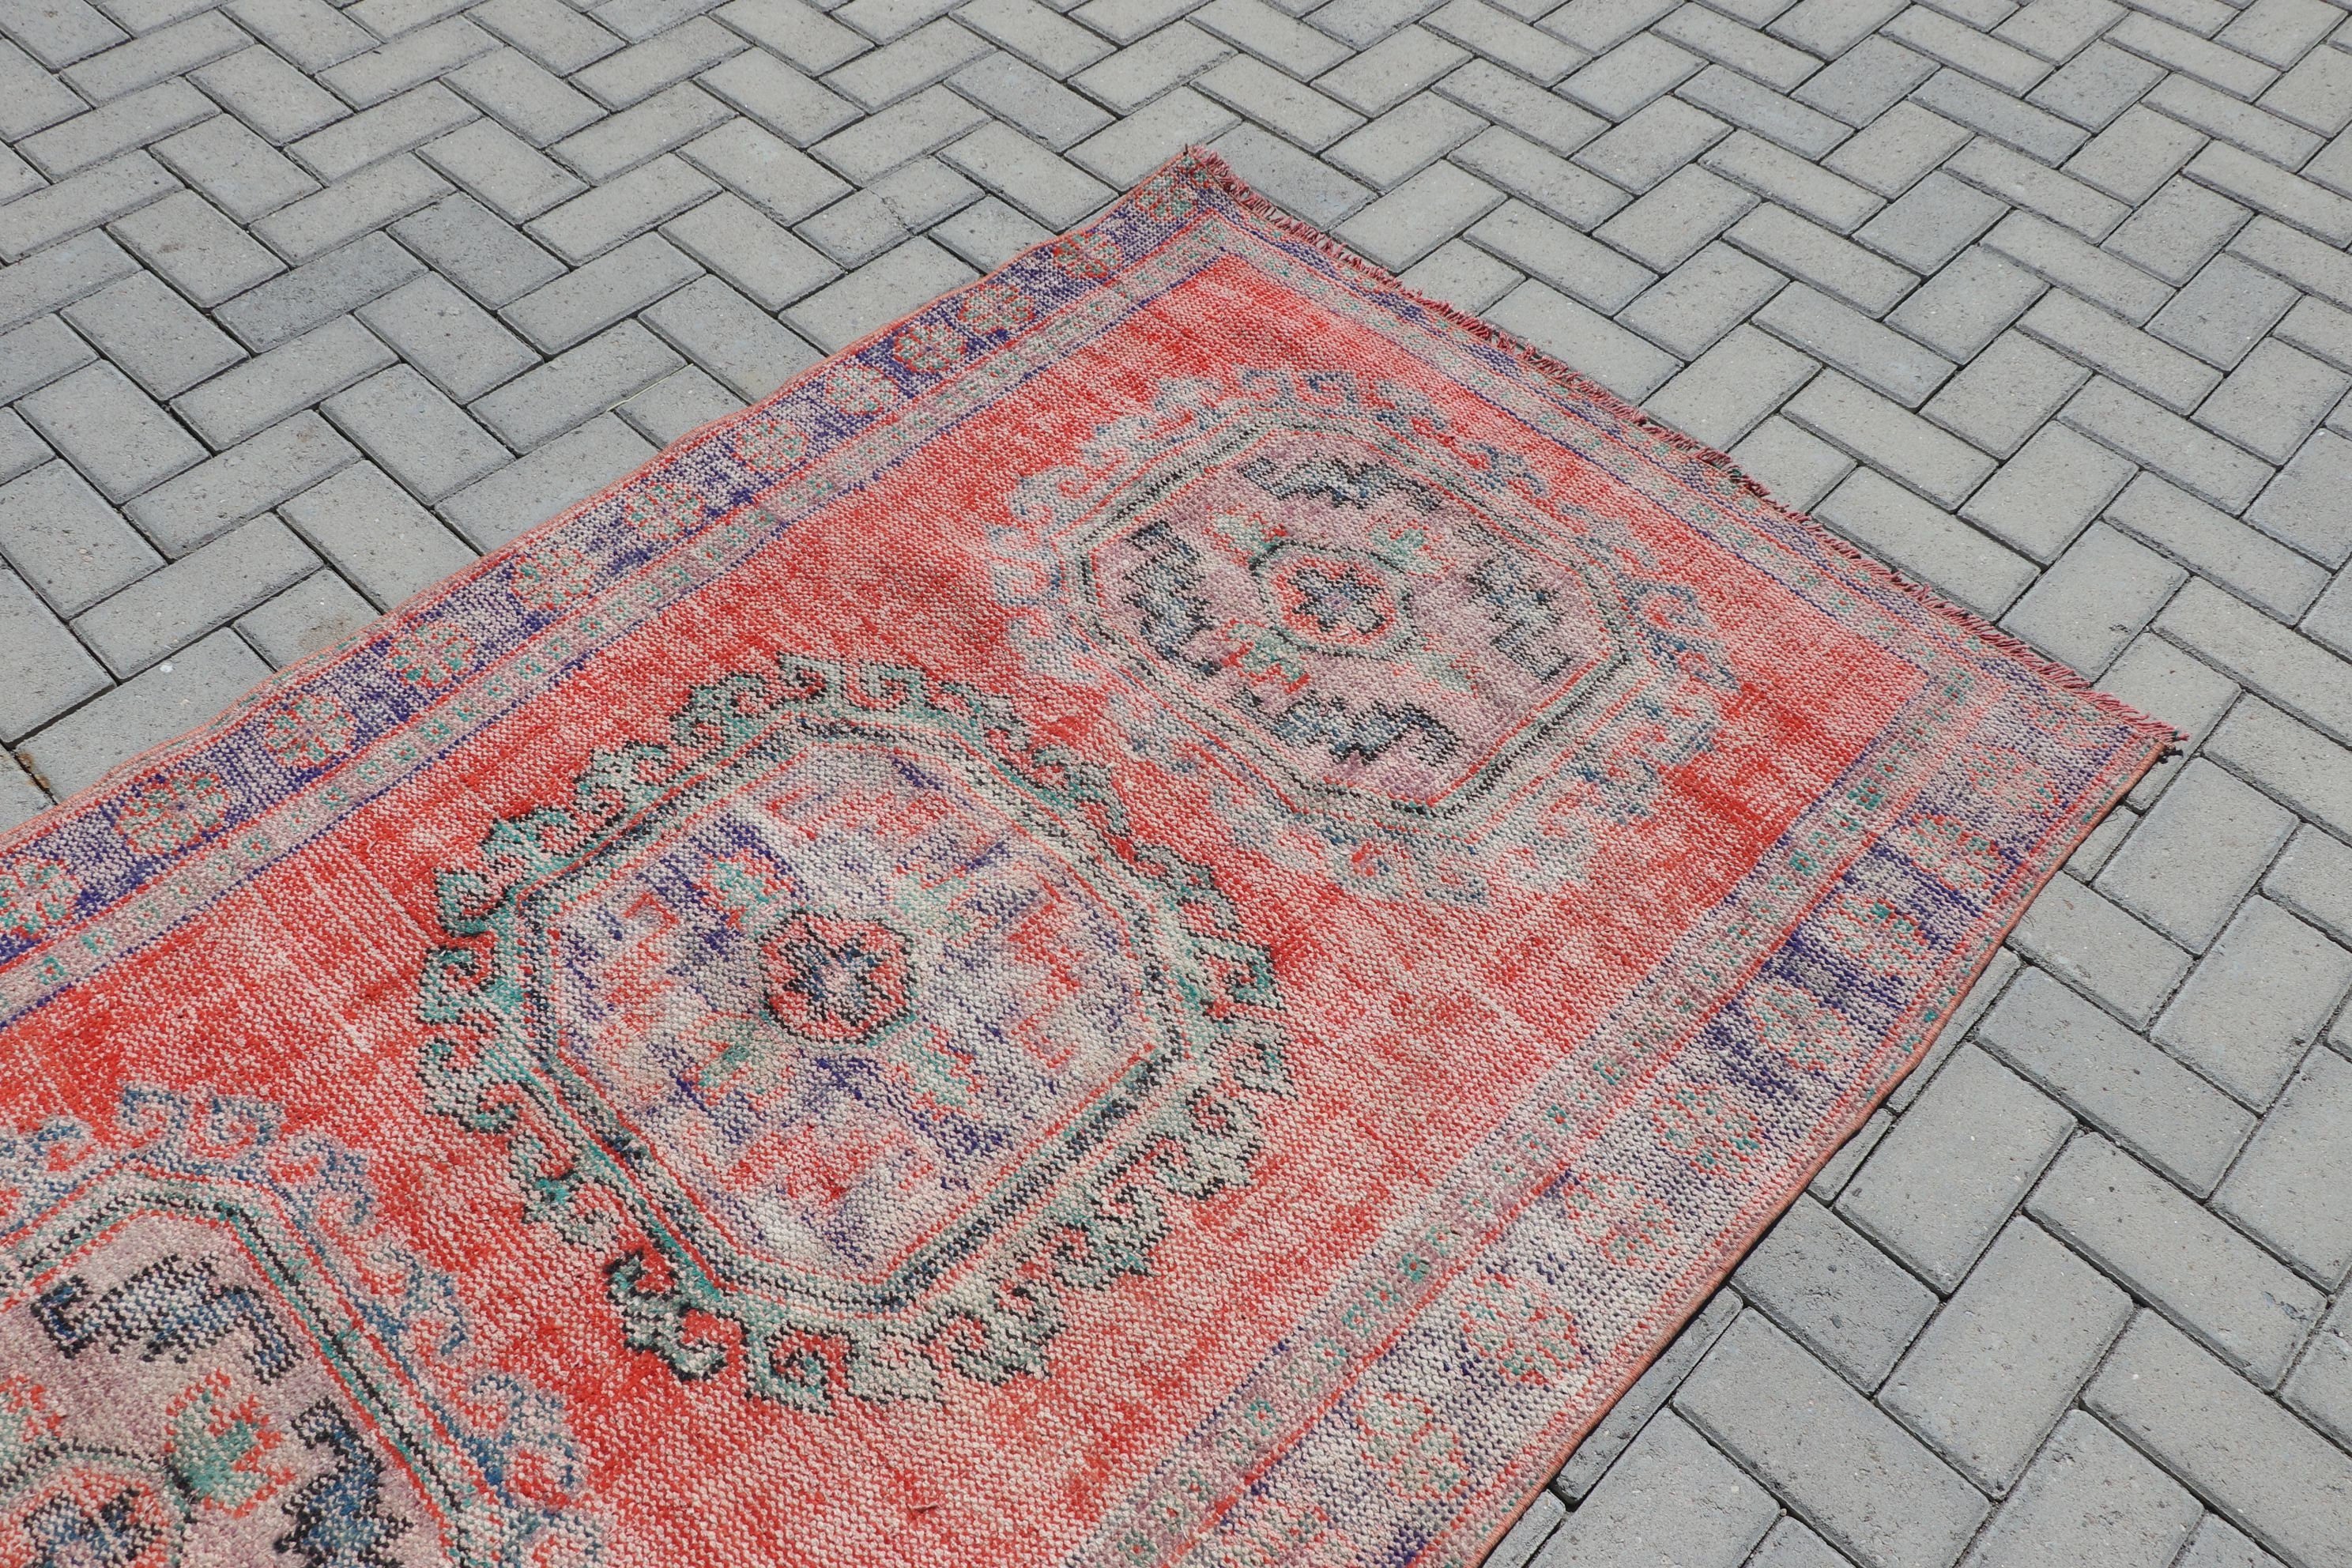 Anatolian Rugs, 4x10.6 ft Runner Rug, Red Cool Rug, Turkish Rugs, Antique Rug, Kitchen Rug, Rugs for Hallway, Vintage Rug, Hand Knotted Rug